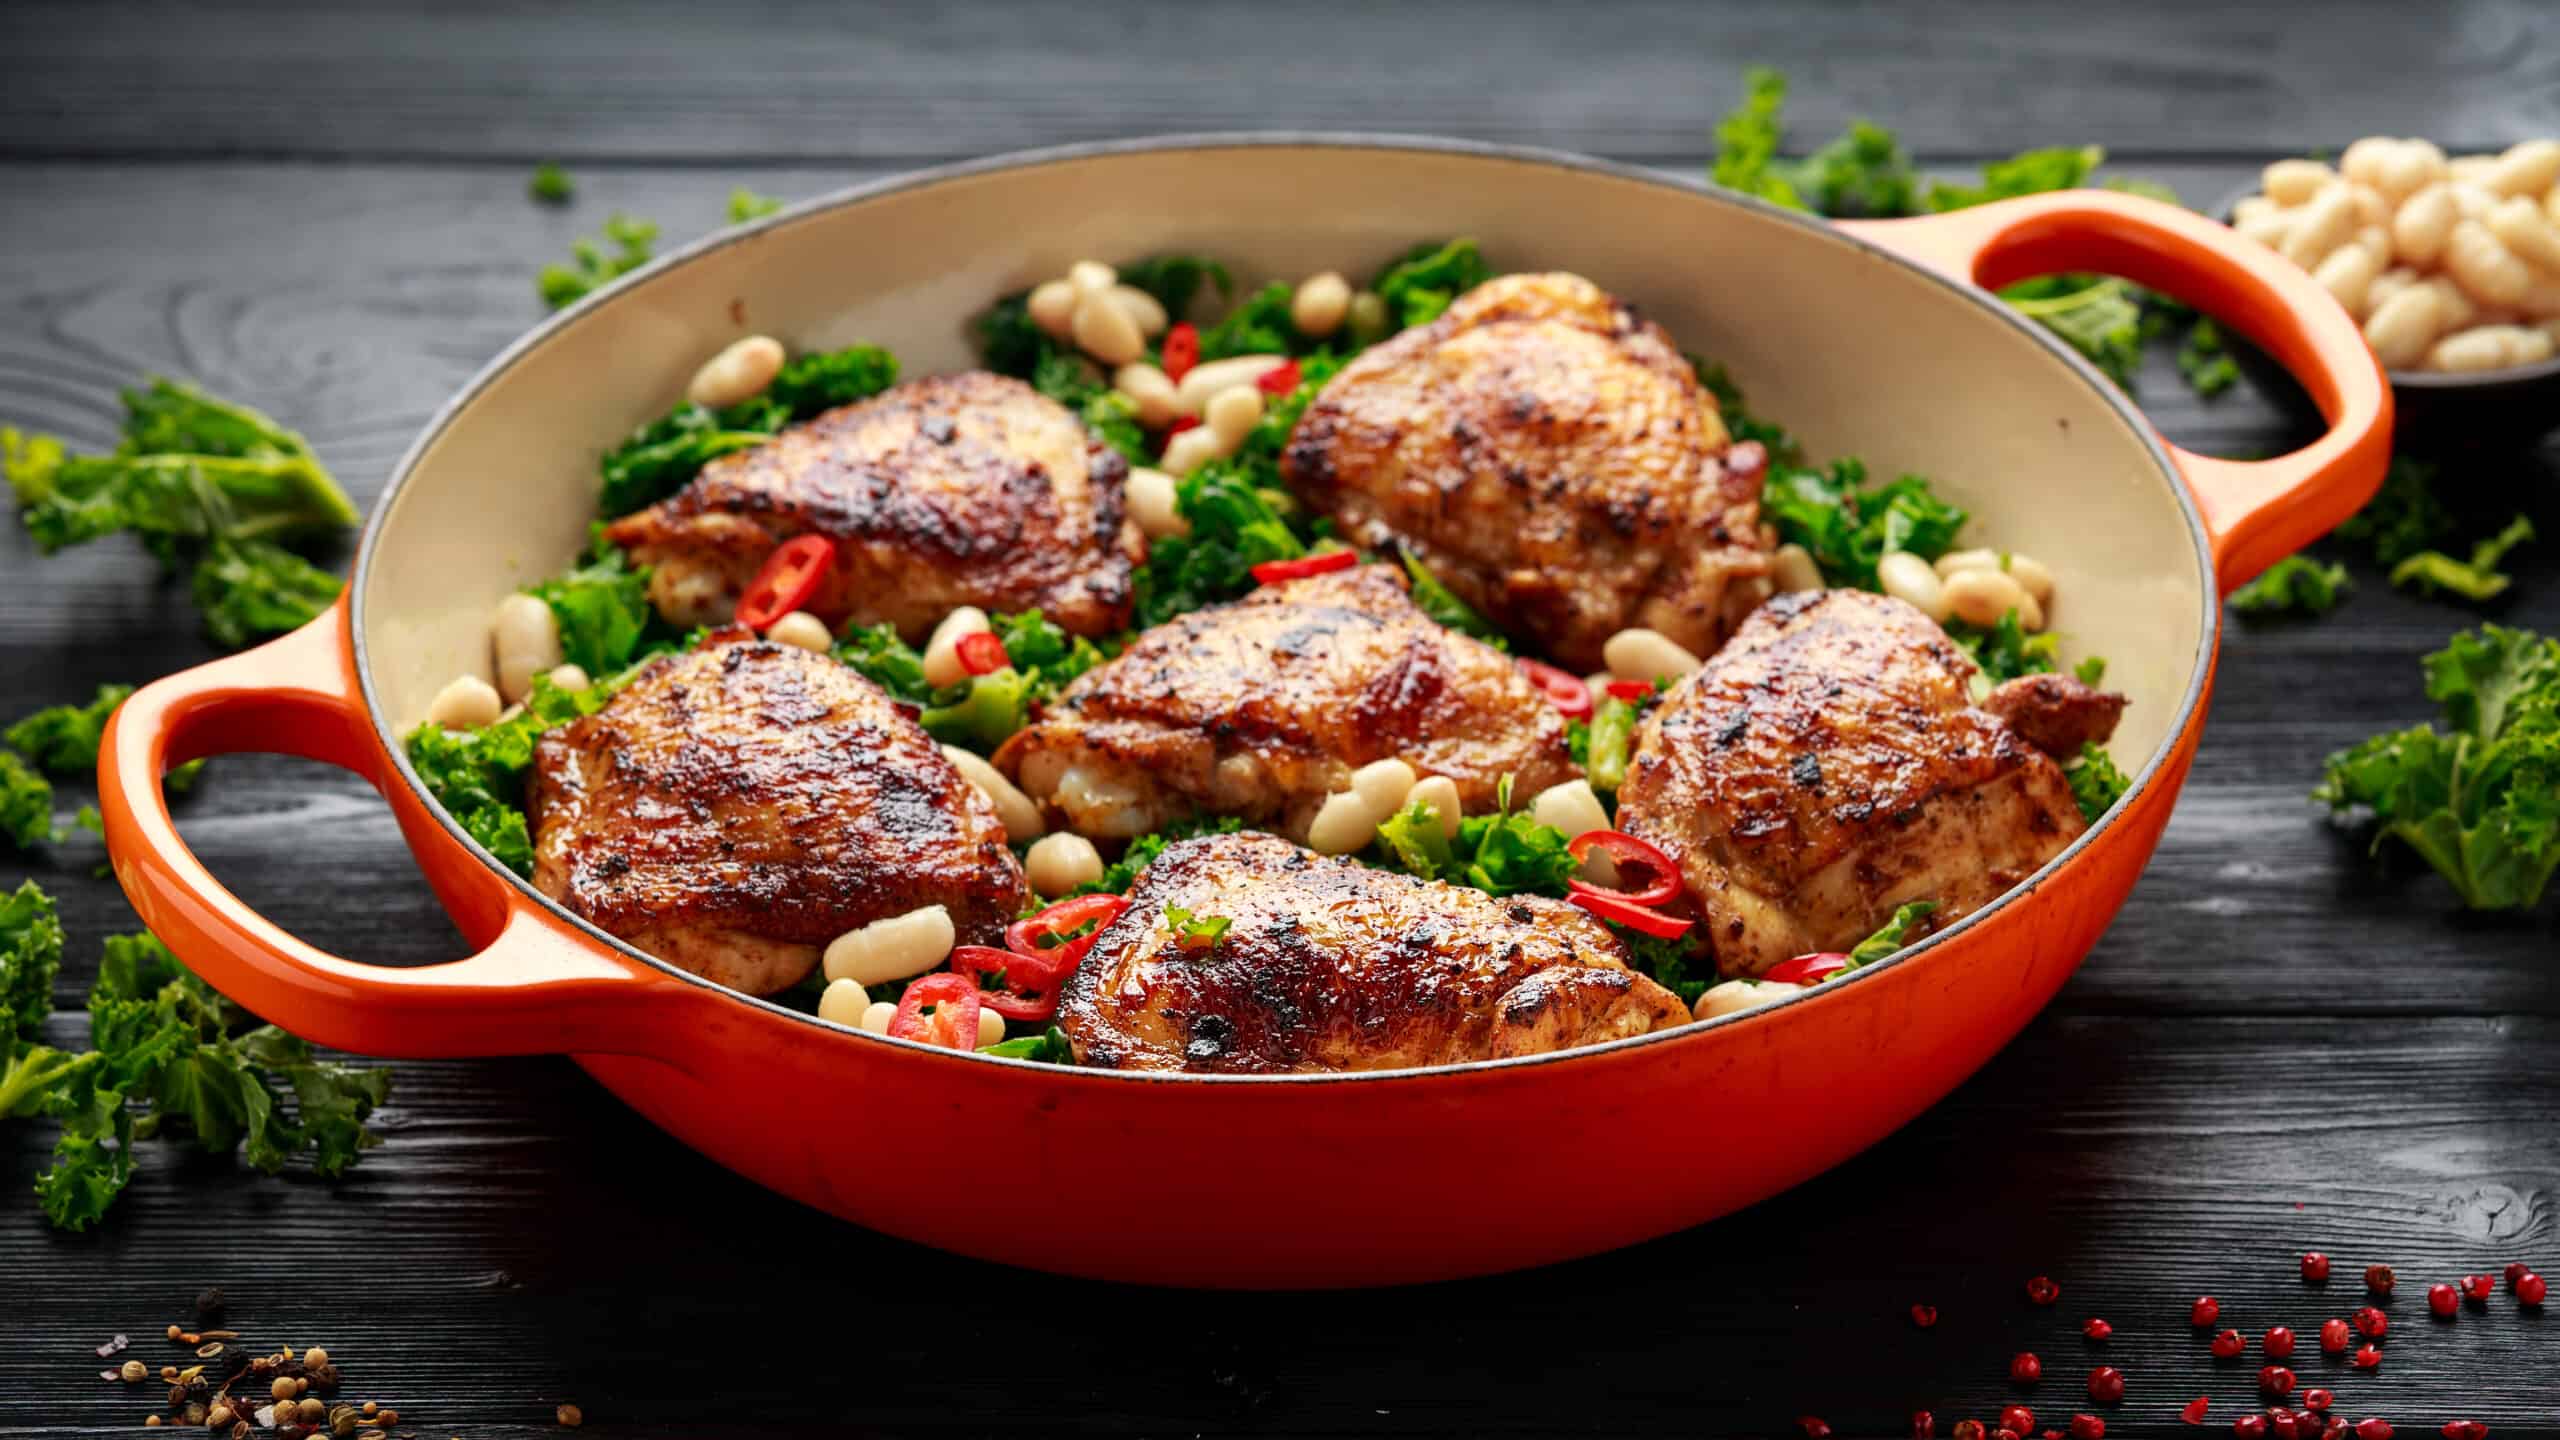 One-pot braised chicken thighs with kale and cannellini beans served with chili peppers